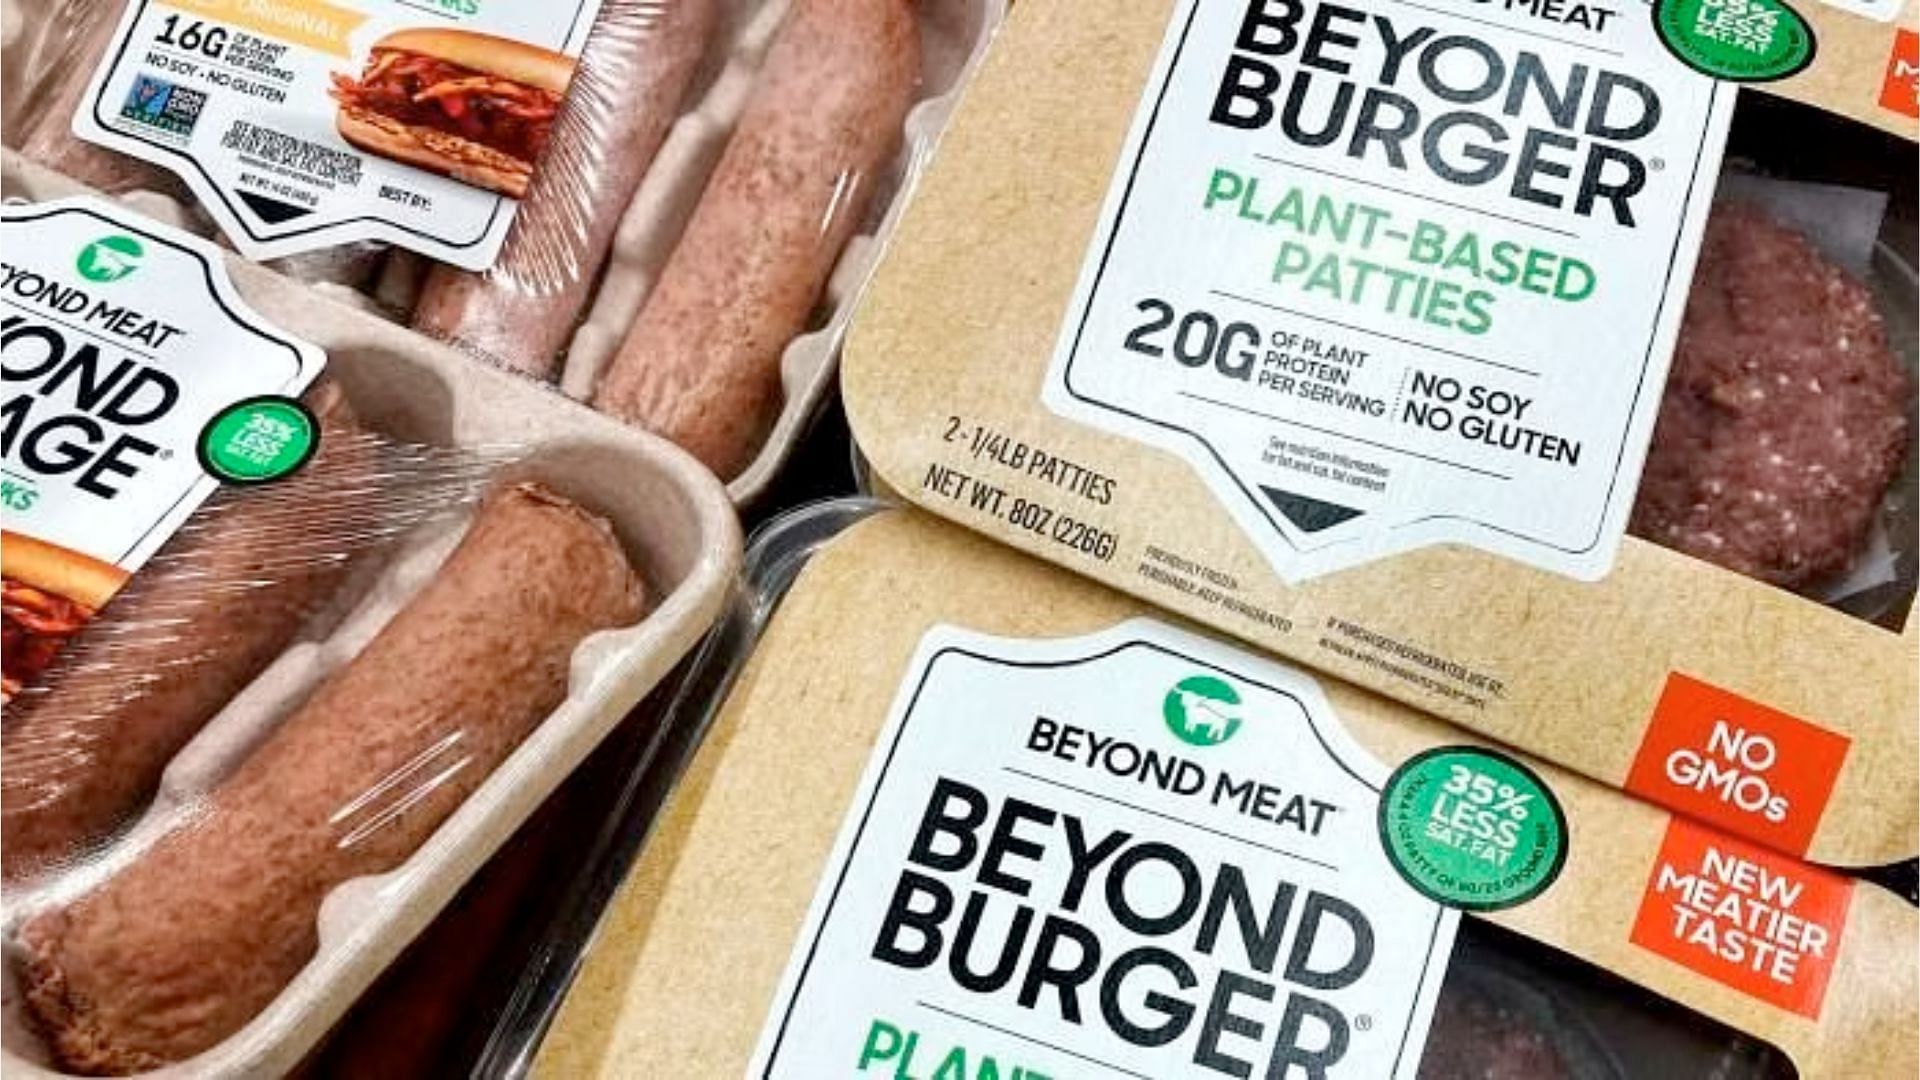 The plant-based meat company is facing backlash (image via Beyond Meat)